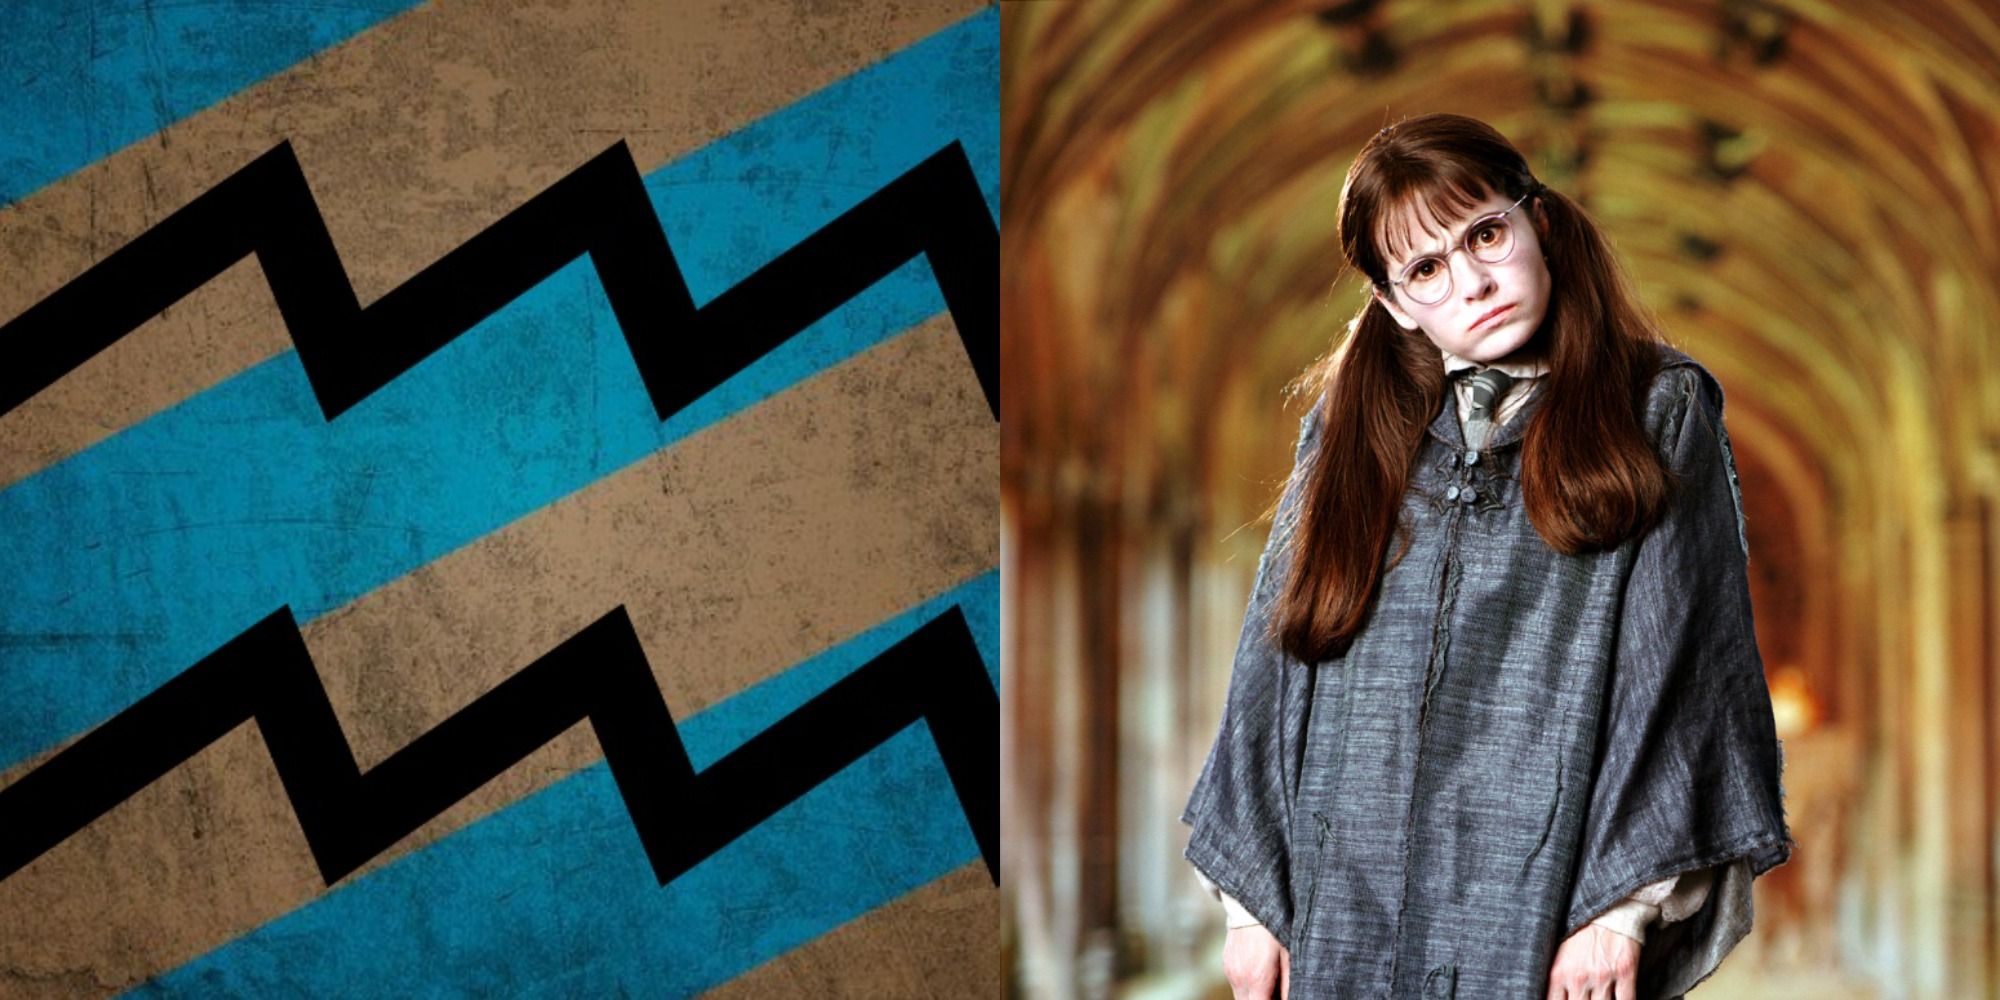 Aquarius symbol over blue and bronze stripes next to Moaning Myrtle in Ravenclaw robe